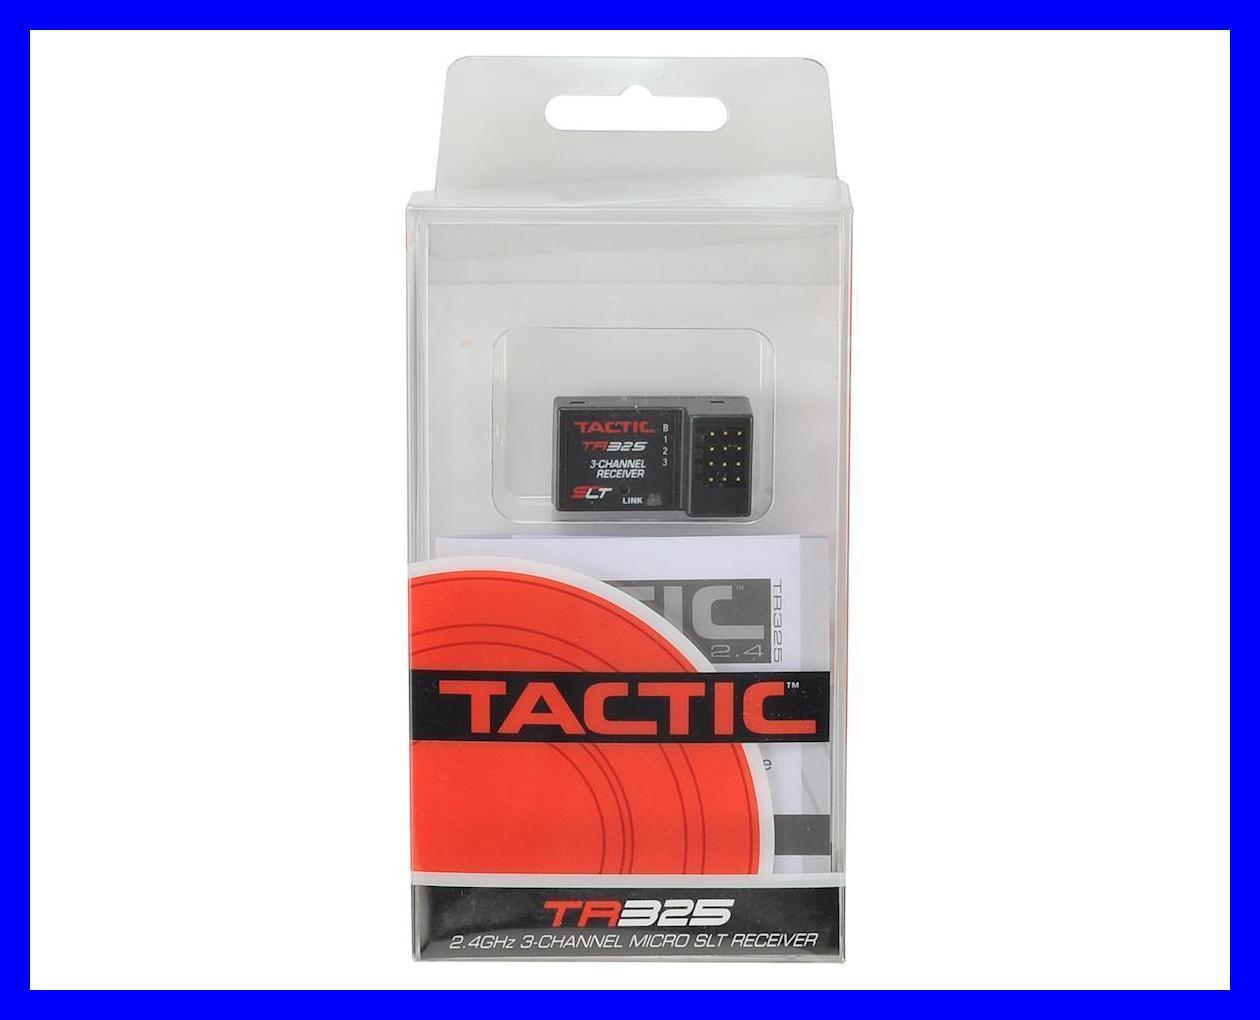 Tactic TR325 2.4ghz 3 Channel 3 Ch Micro SLT RC Airplane Receiver RX TACL0325